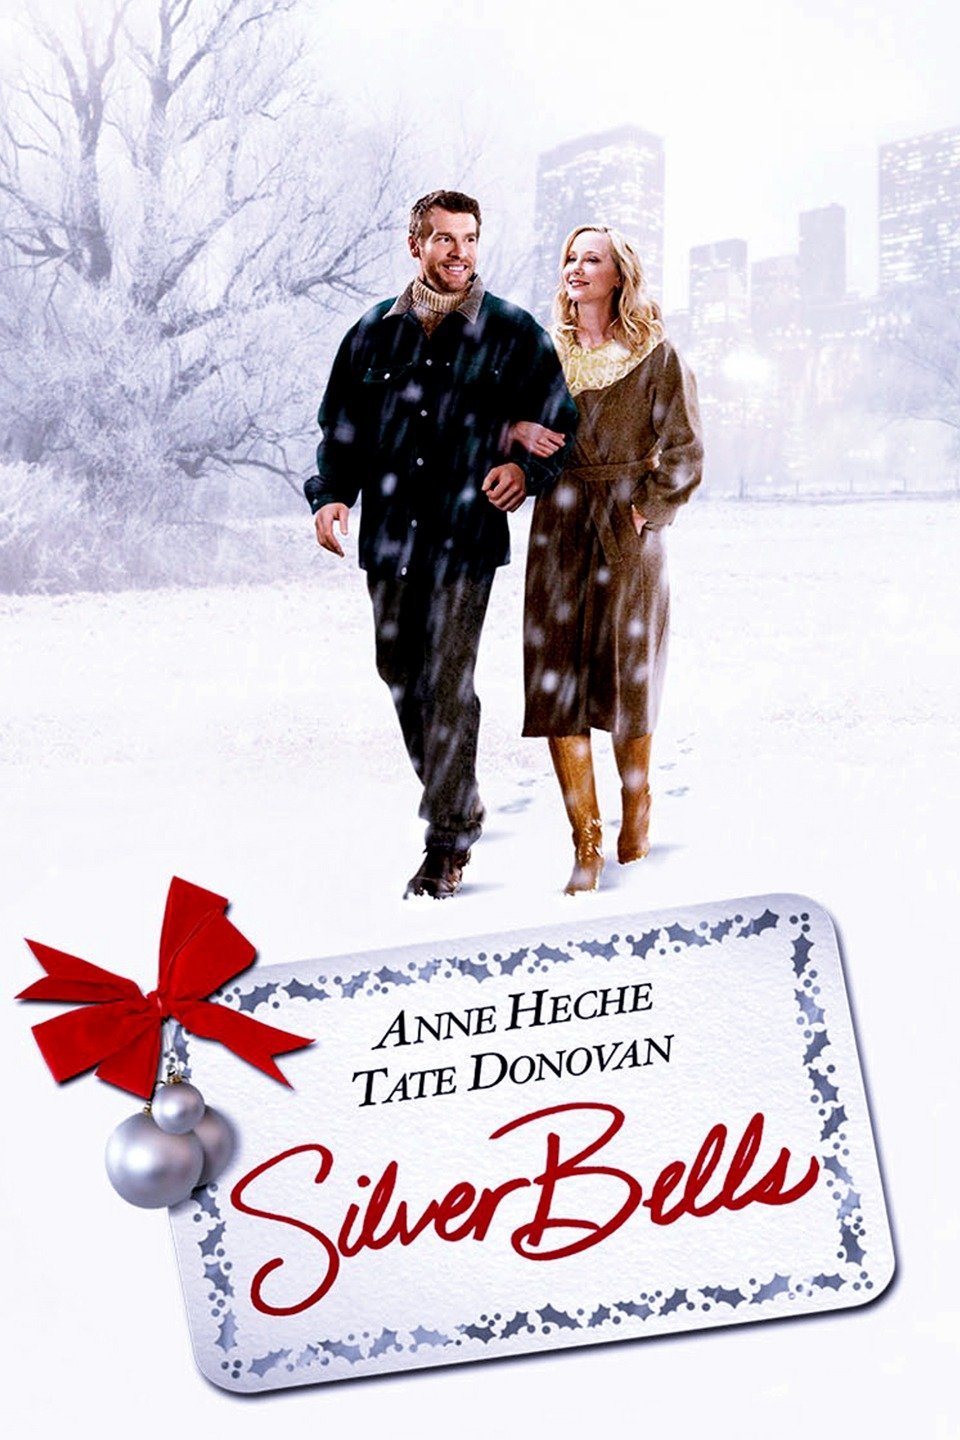 Poster of the movie Silver Bells